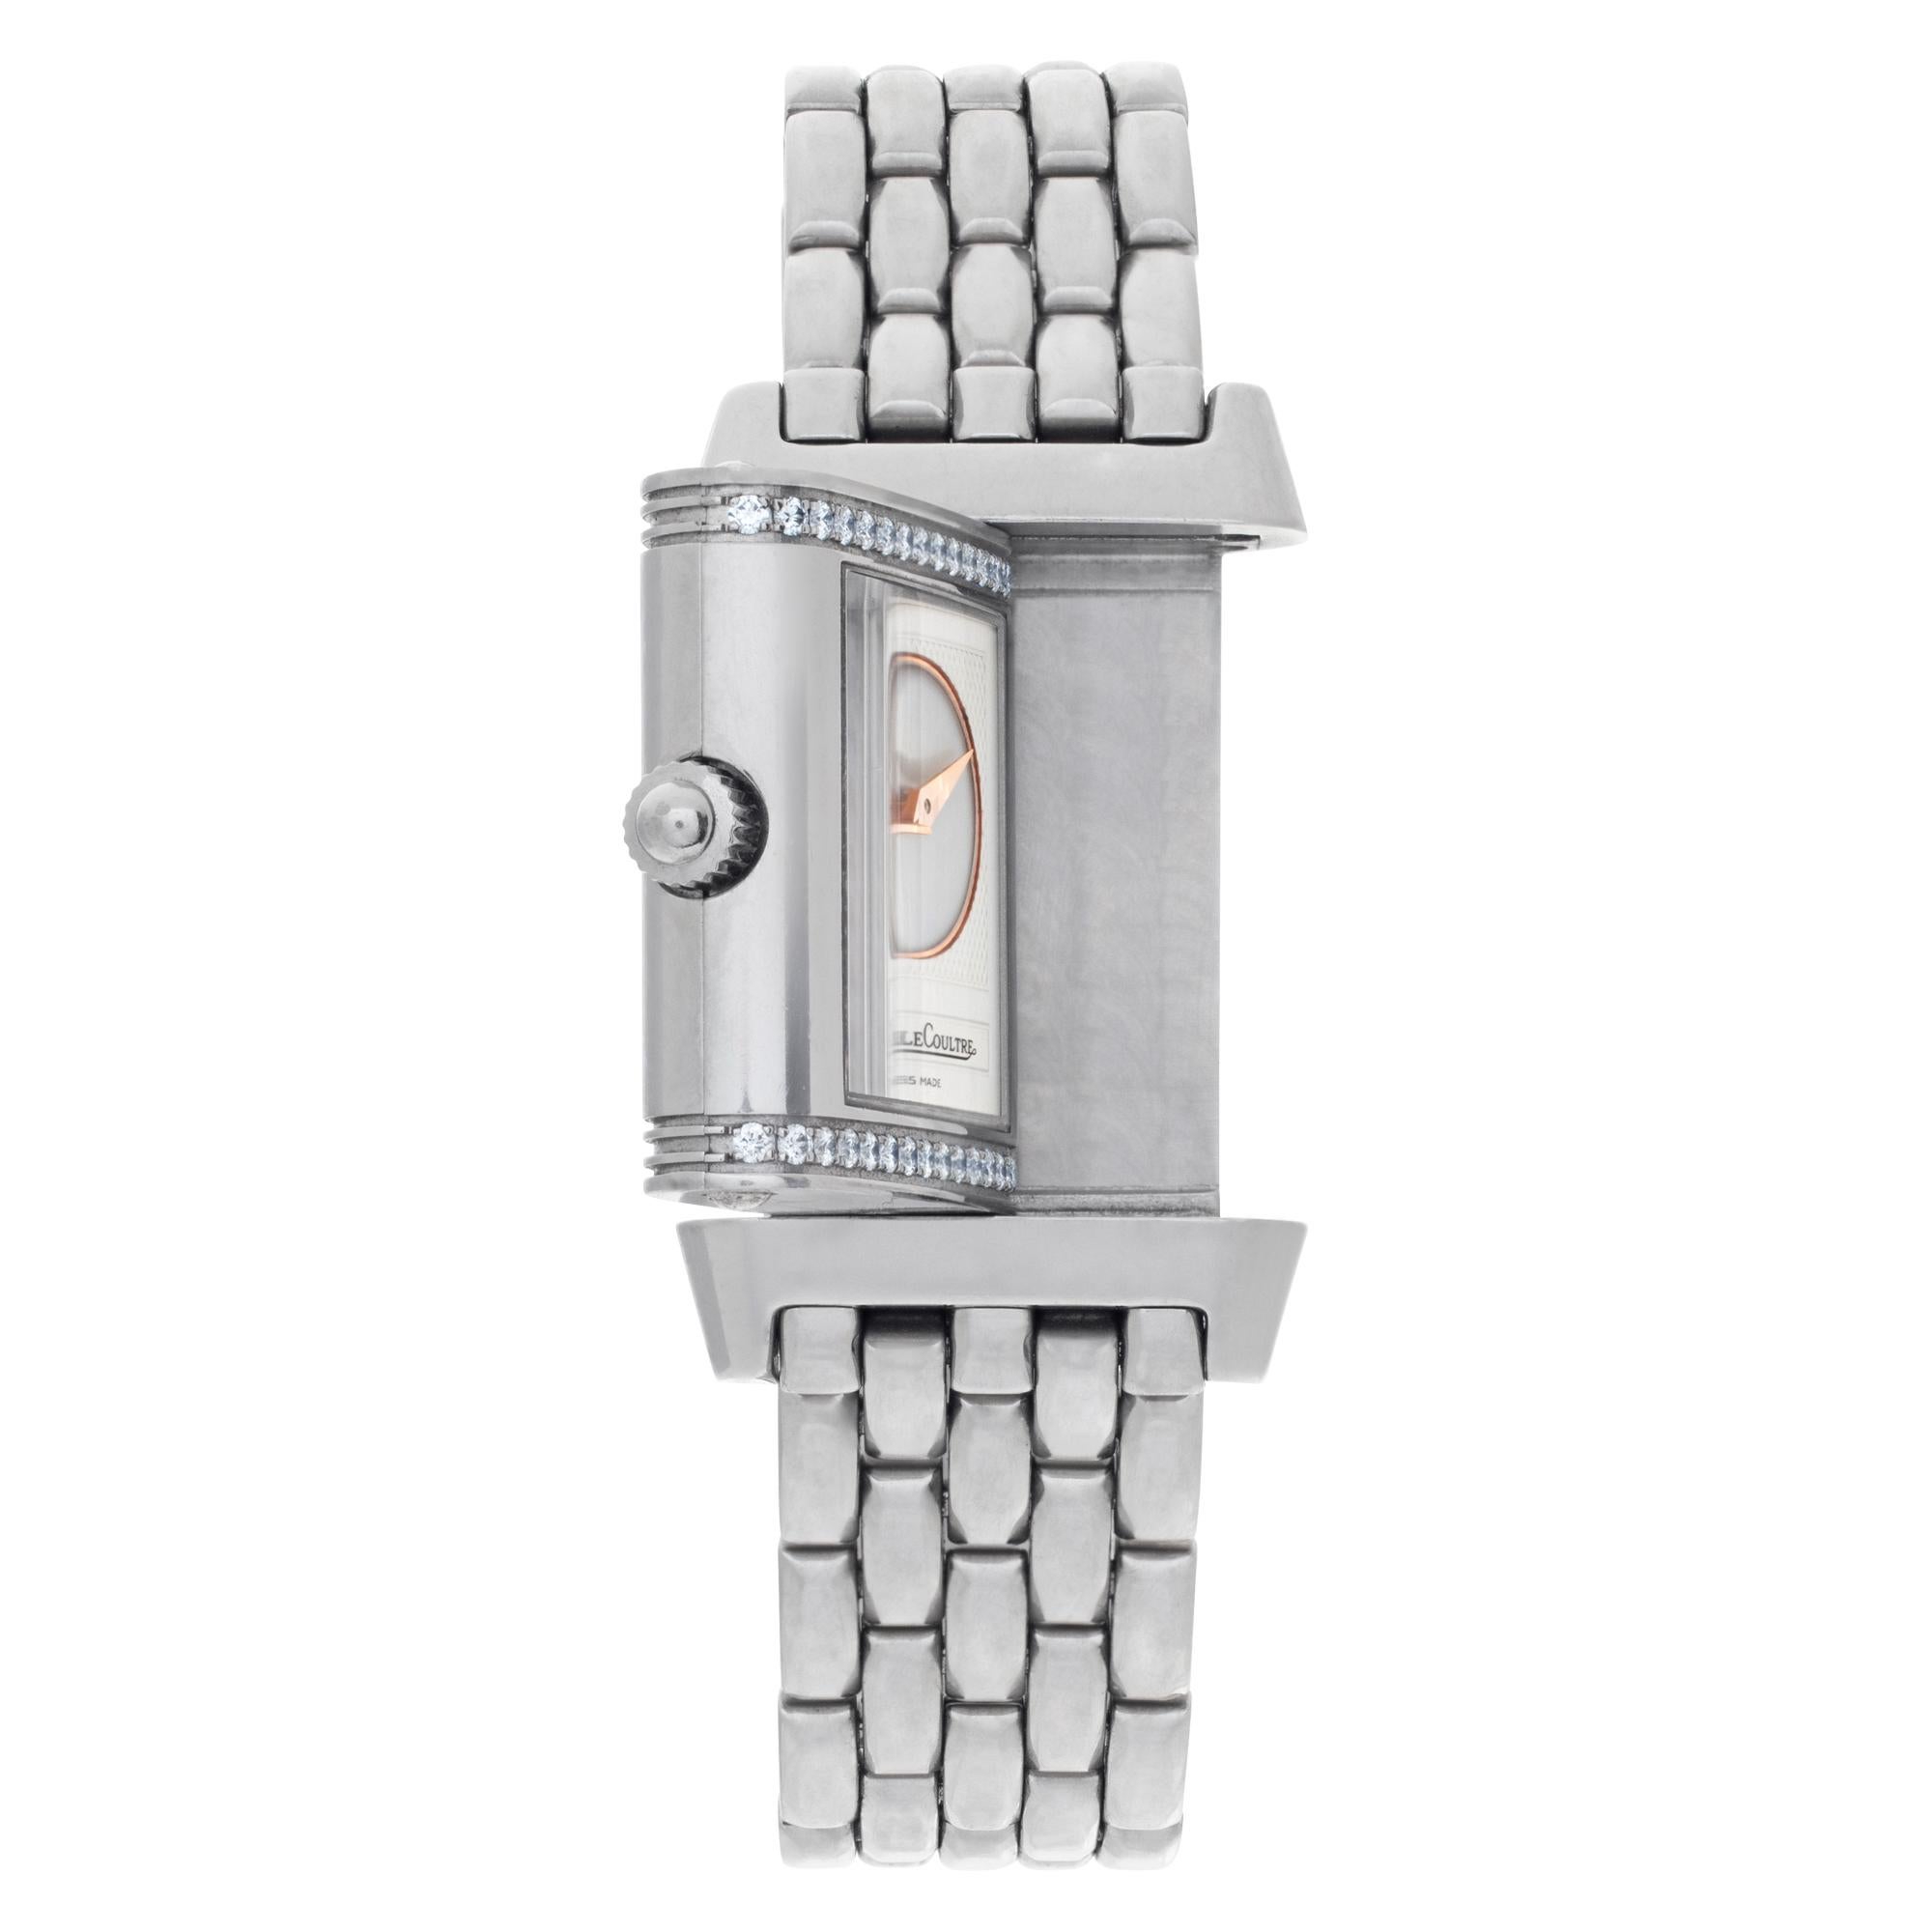 Jaeger LeCoultre Reverso Duetto Duo in stainless steel with mother of pearl dial and diamond bezel. Manual Wind Movement. 28.5 mm length by 21 mm width case size. Ref 266.8.11. Fine Pre-owned Jaeger LeCoultre Watch.

Certified preowned Vintage